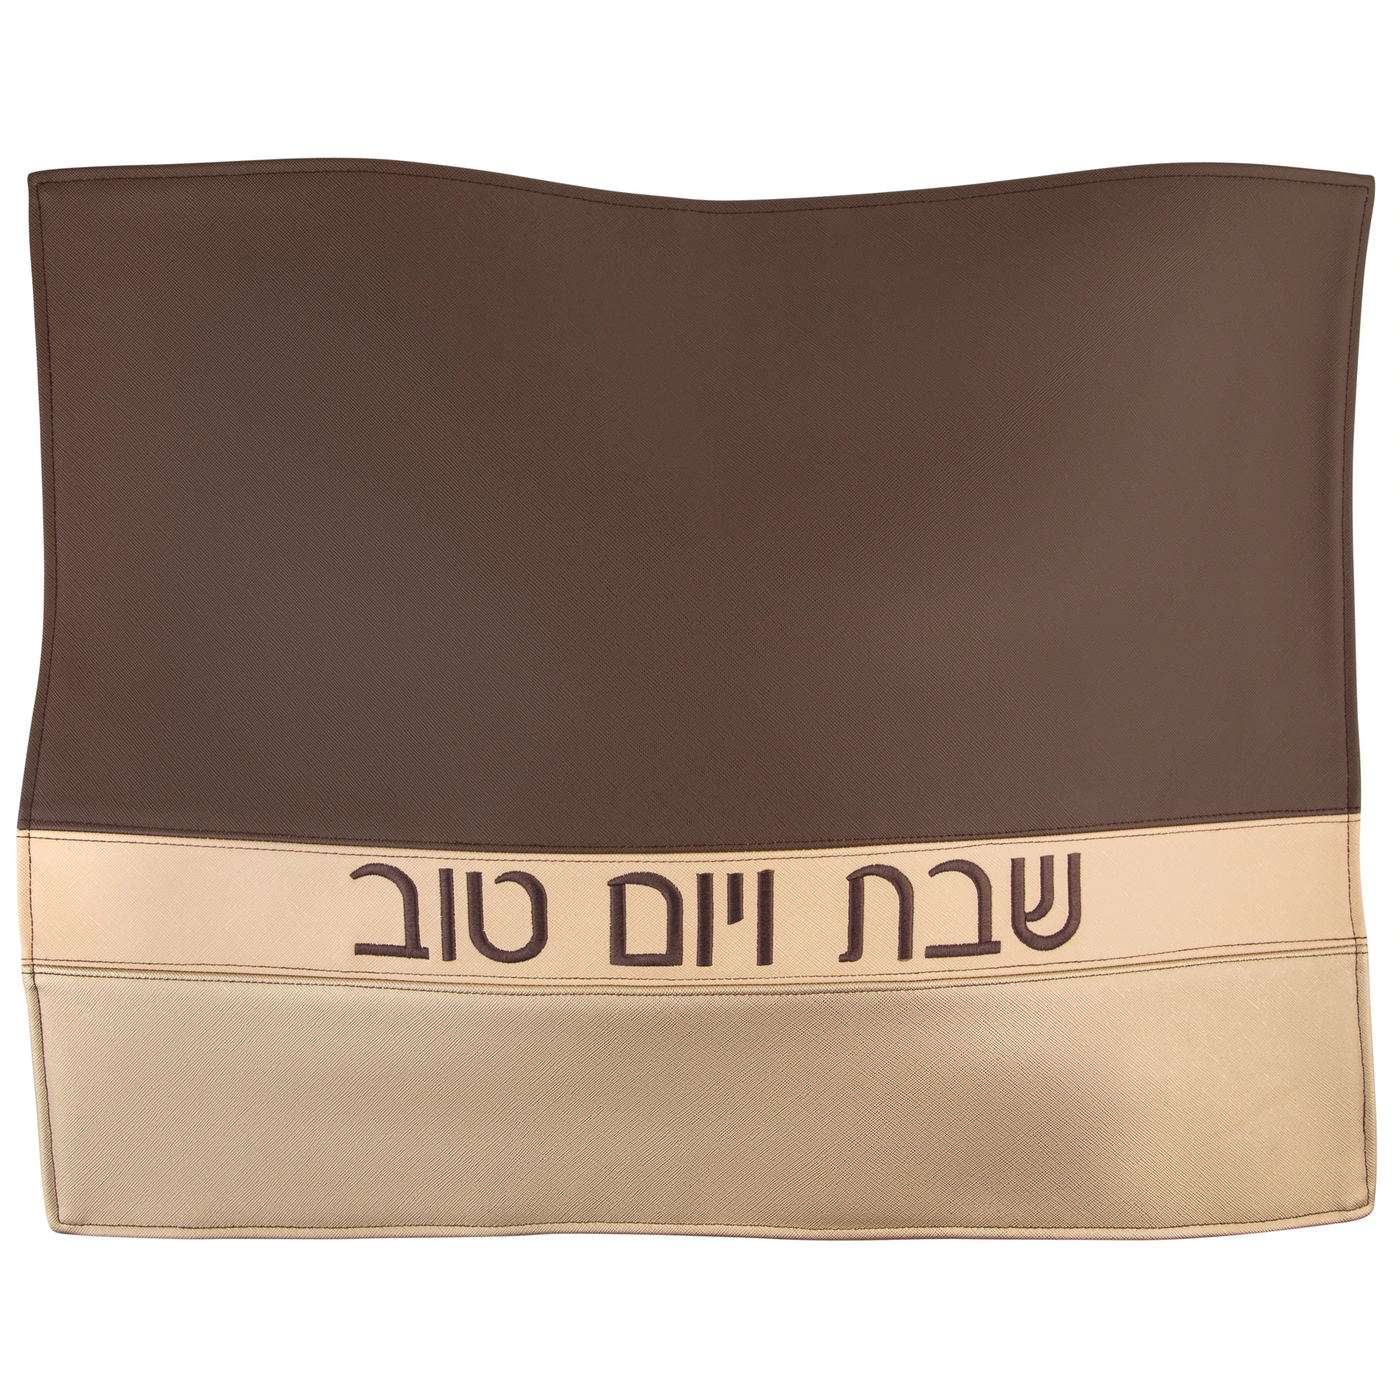 Horizontal Lined Challah Cover - Brown & Cream & Gold - Set With Style